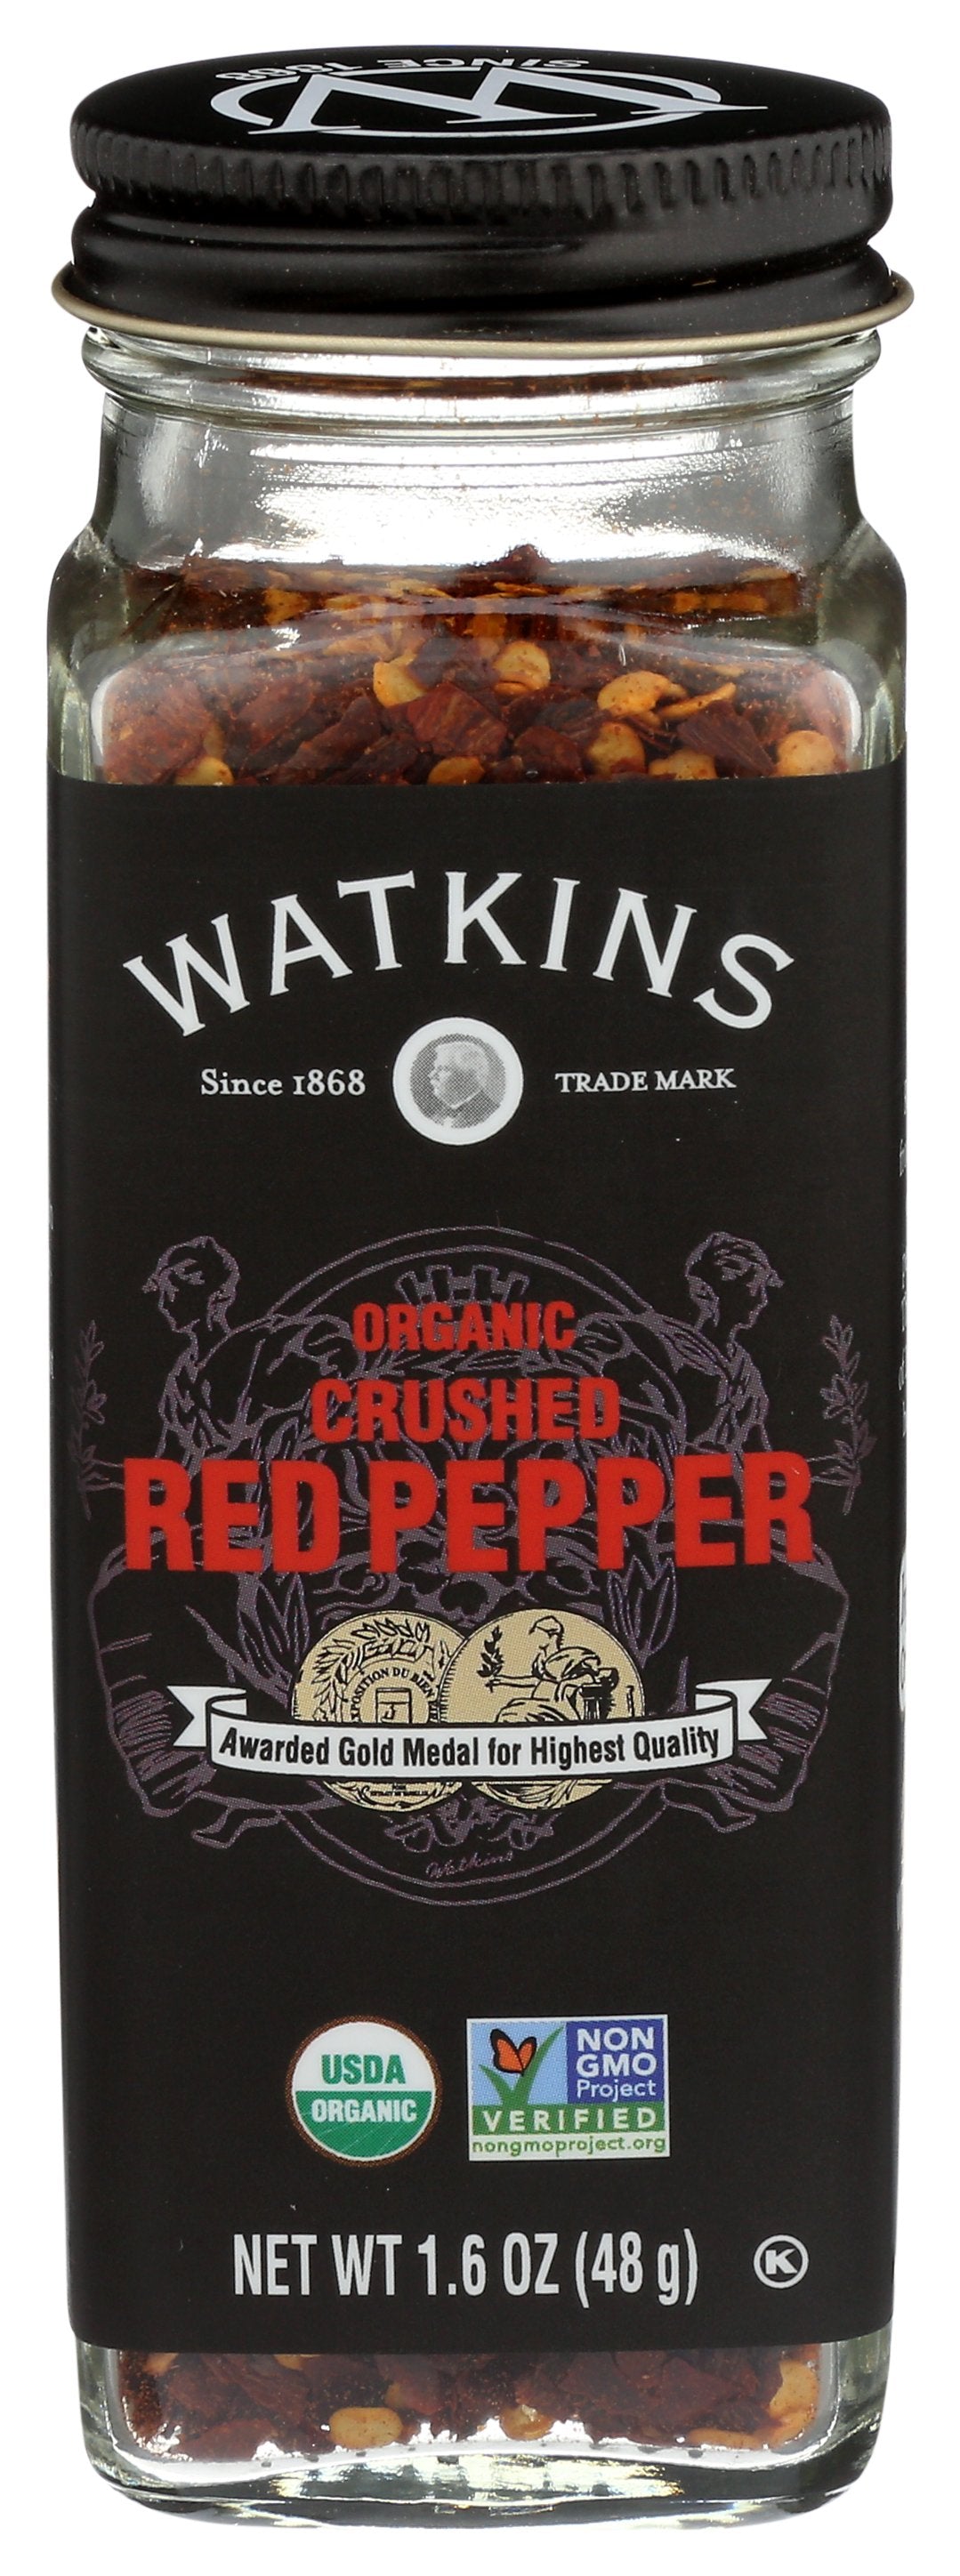 WATKINS SSNNG RED PEPPER CRSH ORG - Case of 6